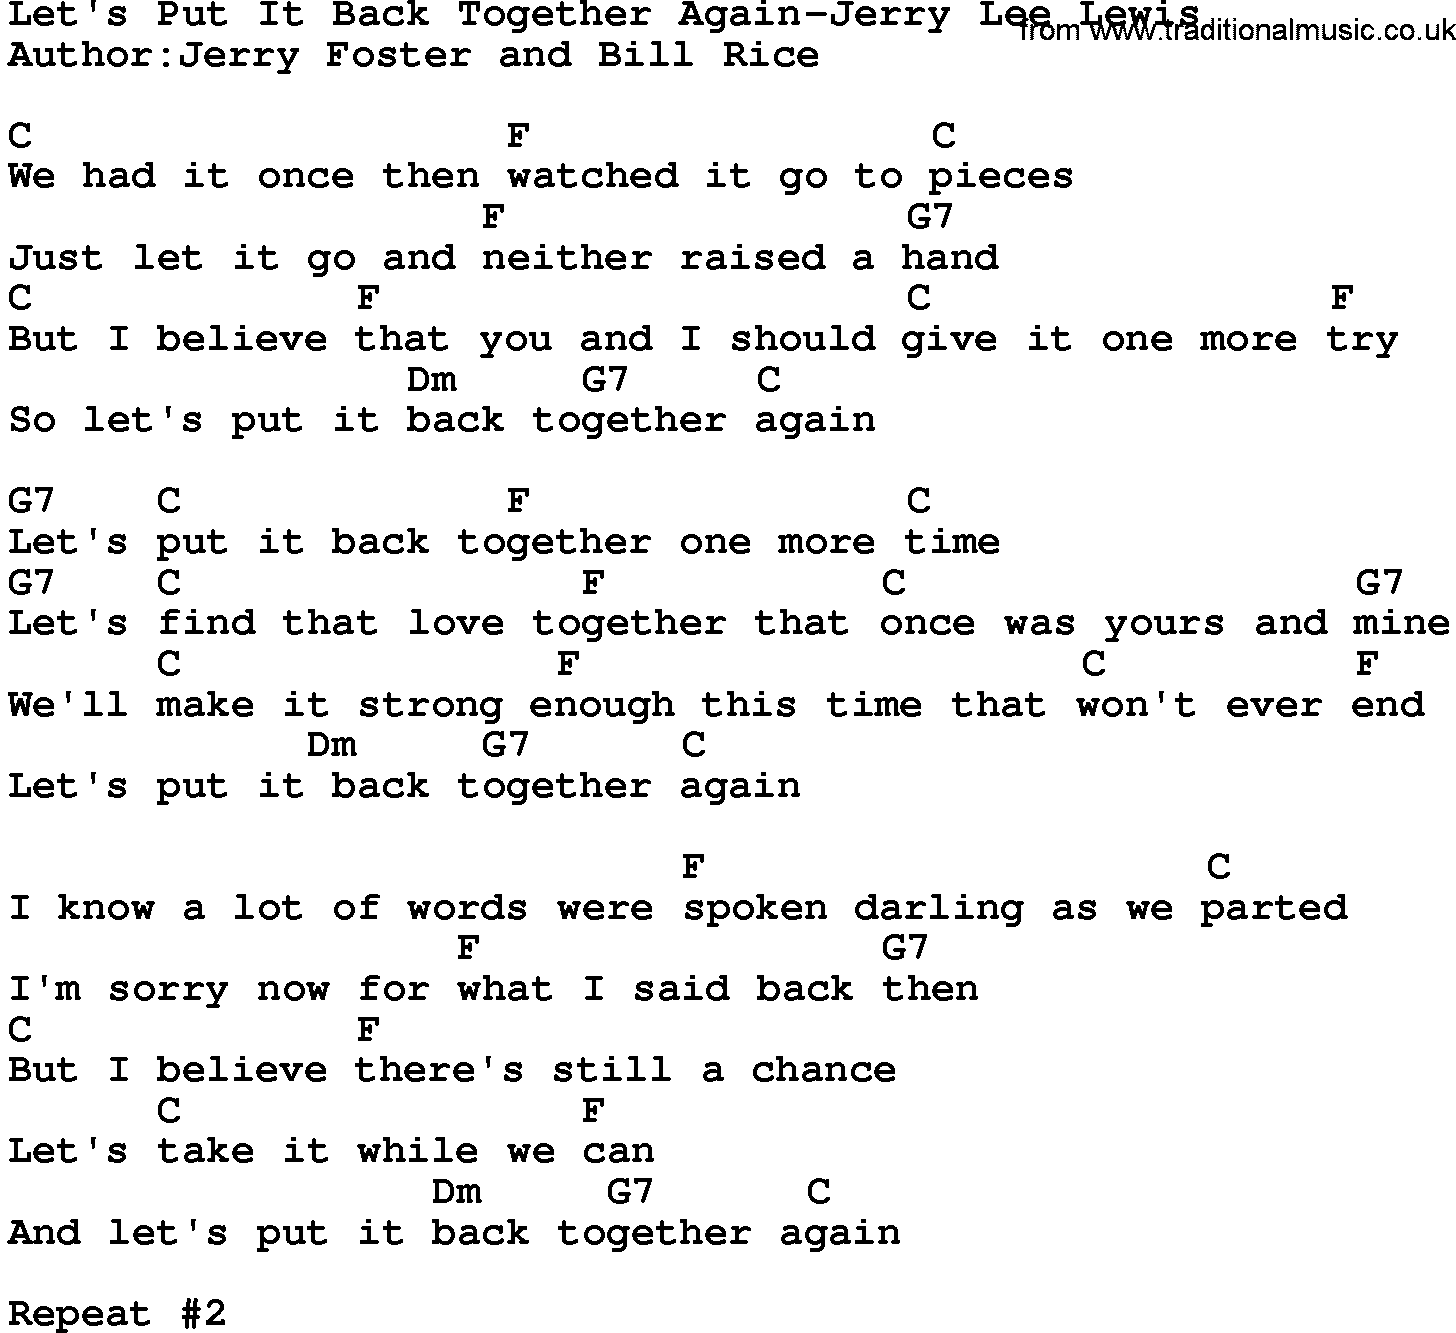 Country music song: Let's Put It Back Together Again-Jerry Lee Lewis lyrics and chords